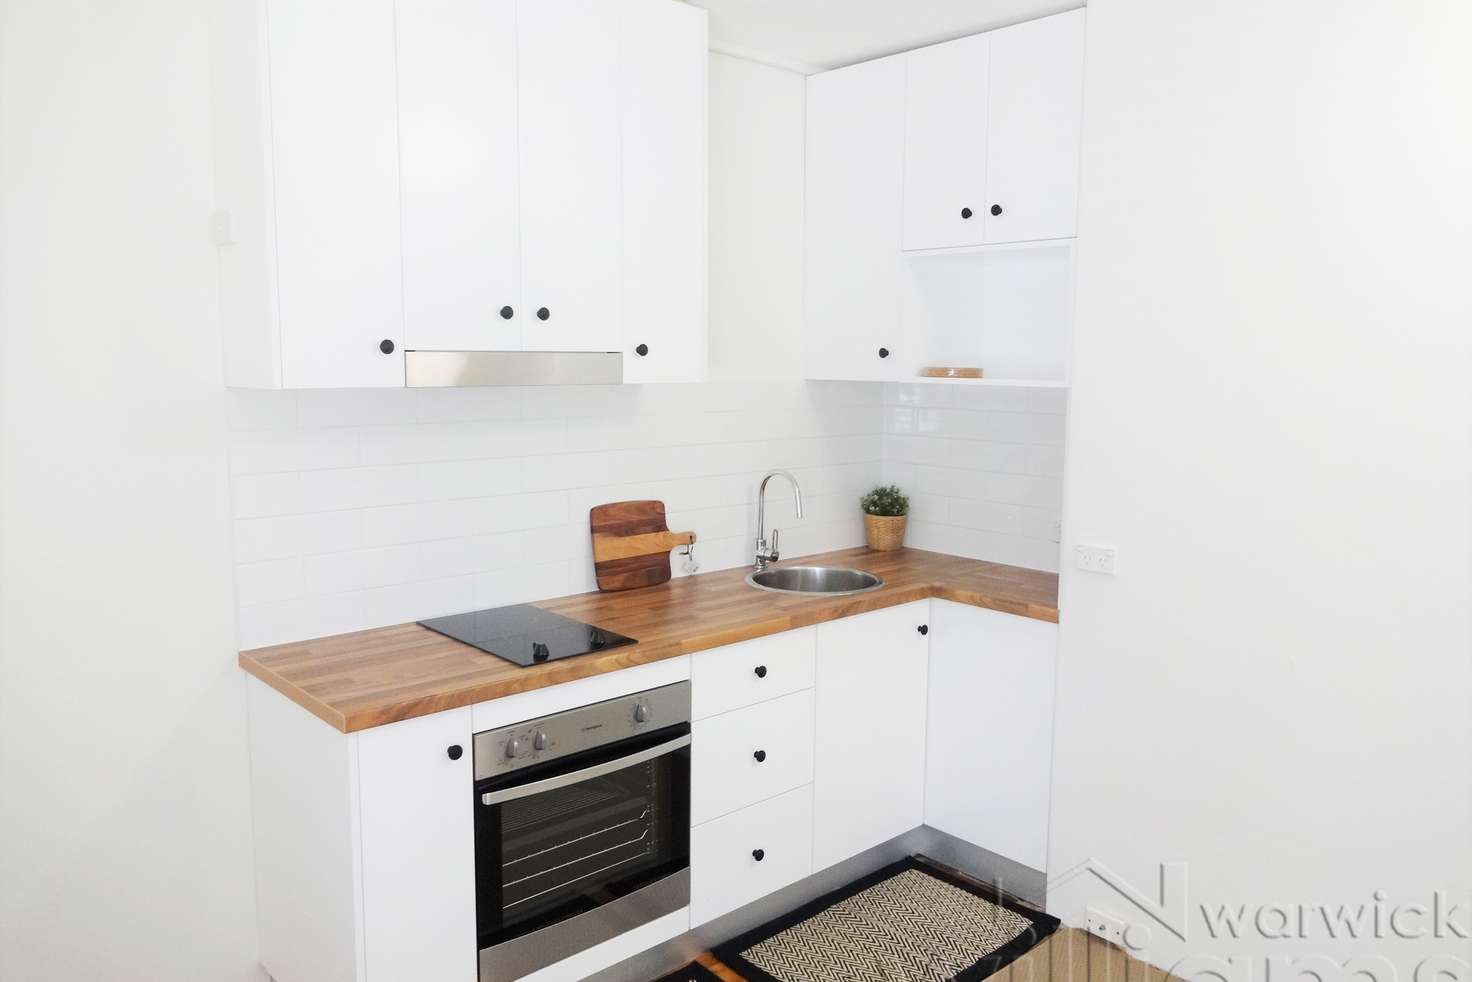 Main view of Homely studio listing, 11/35 George Street, Burwood NSW 2134